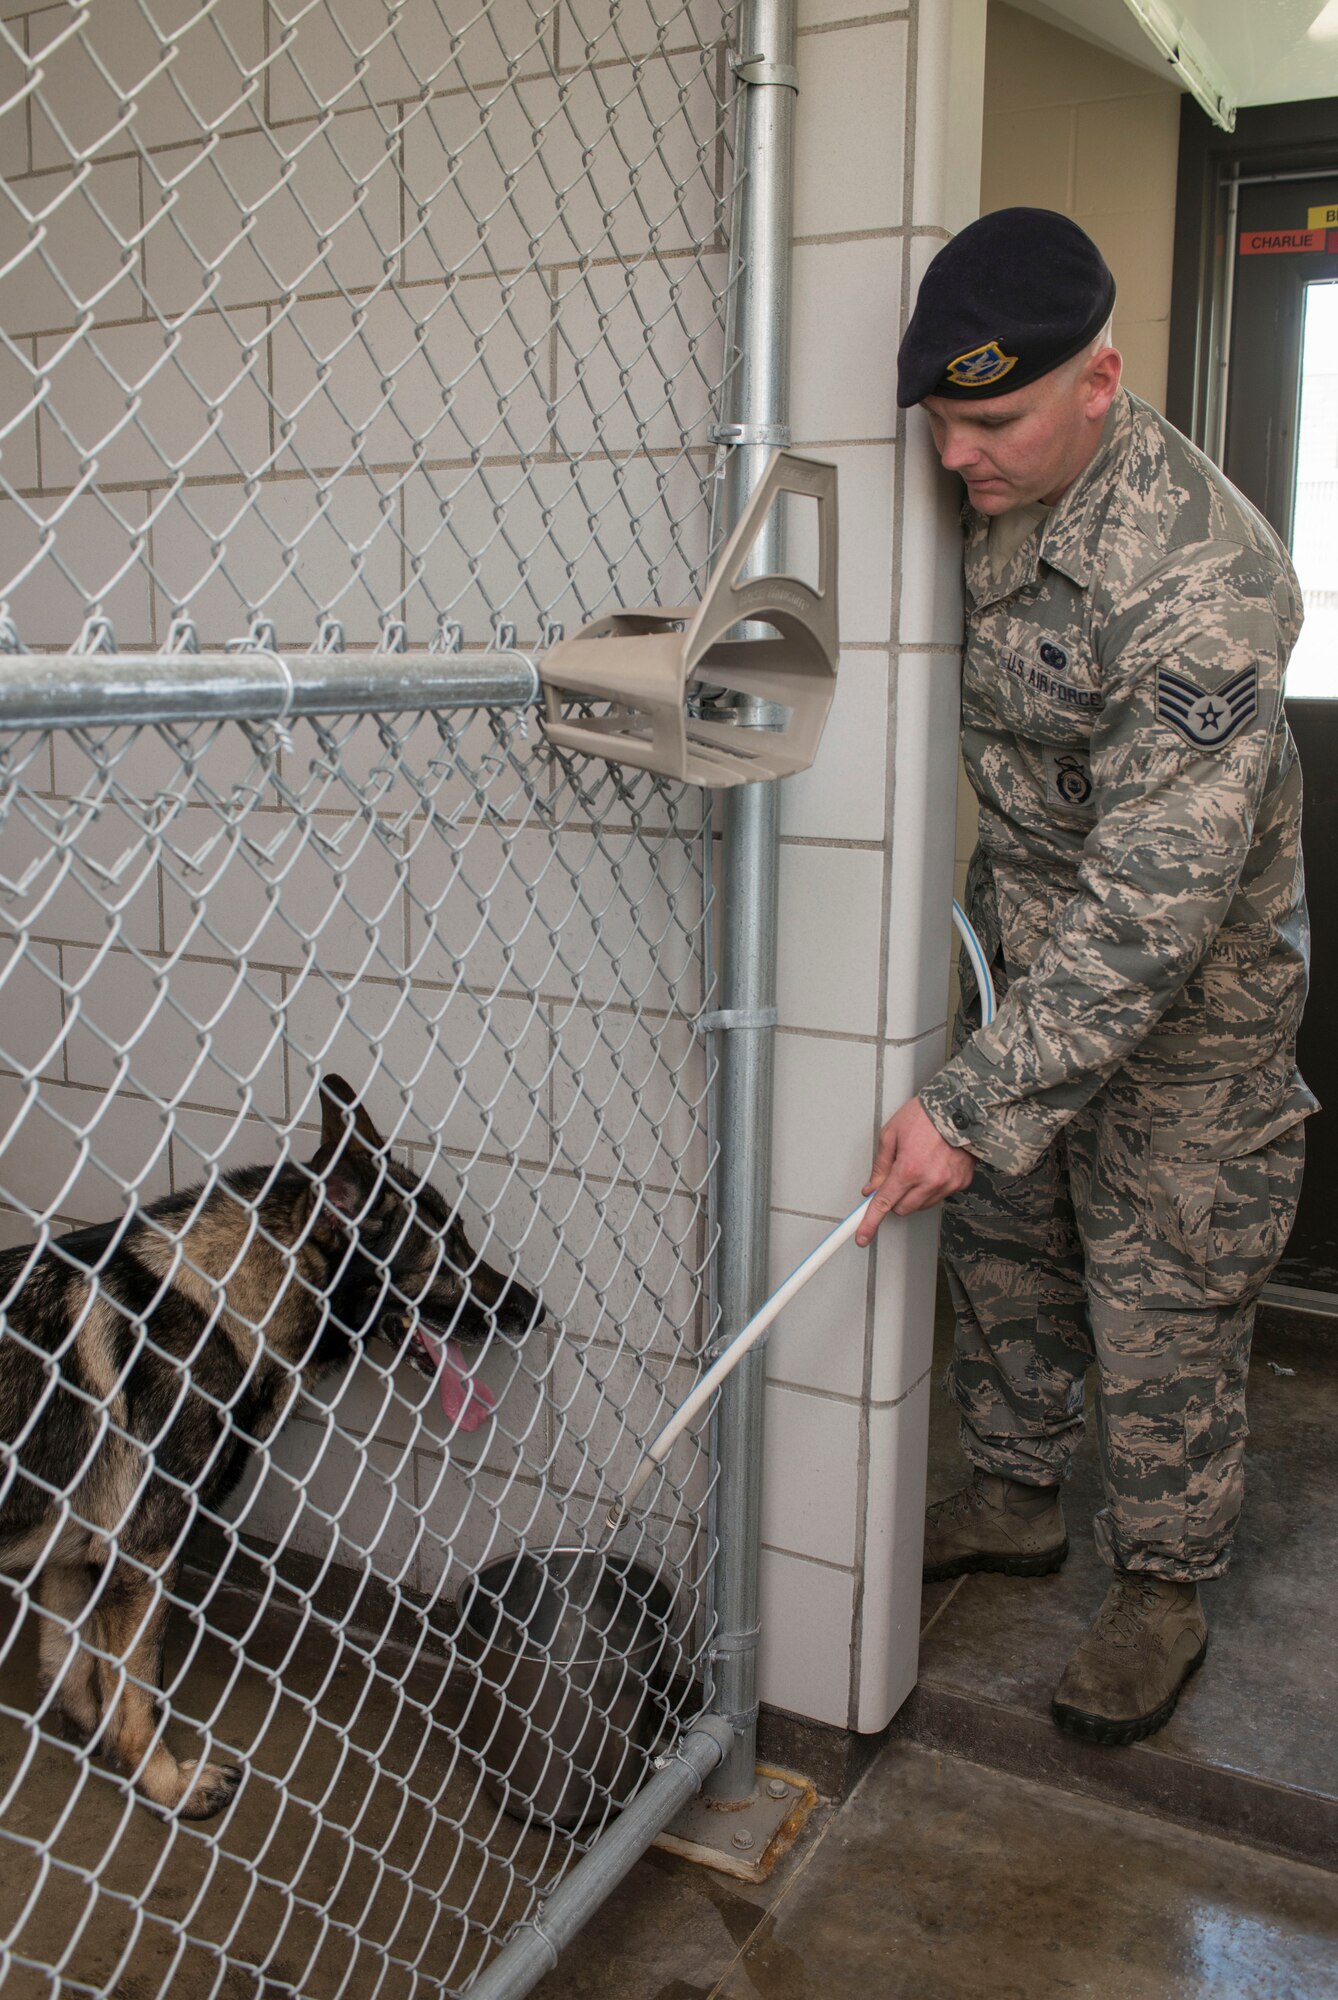 Staff Sgt. Tim Glover, 5th Security Forces Squadron military working dog handler, fills the water dish of his MWD Roko on Minot Air Force Base, N.D., July 28, 2014. Handlers are responsible for feeding their dogs as well as cleaning their kennel, taking them for walks and completing training to stay current on their mission requirements. (U.S. Air Force photo/Senior Airman Stephanie Morris)